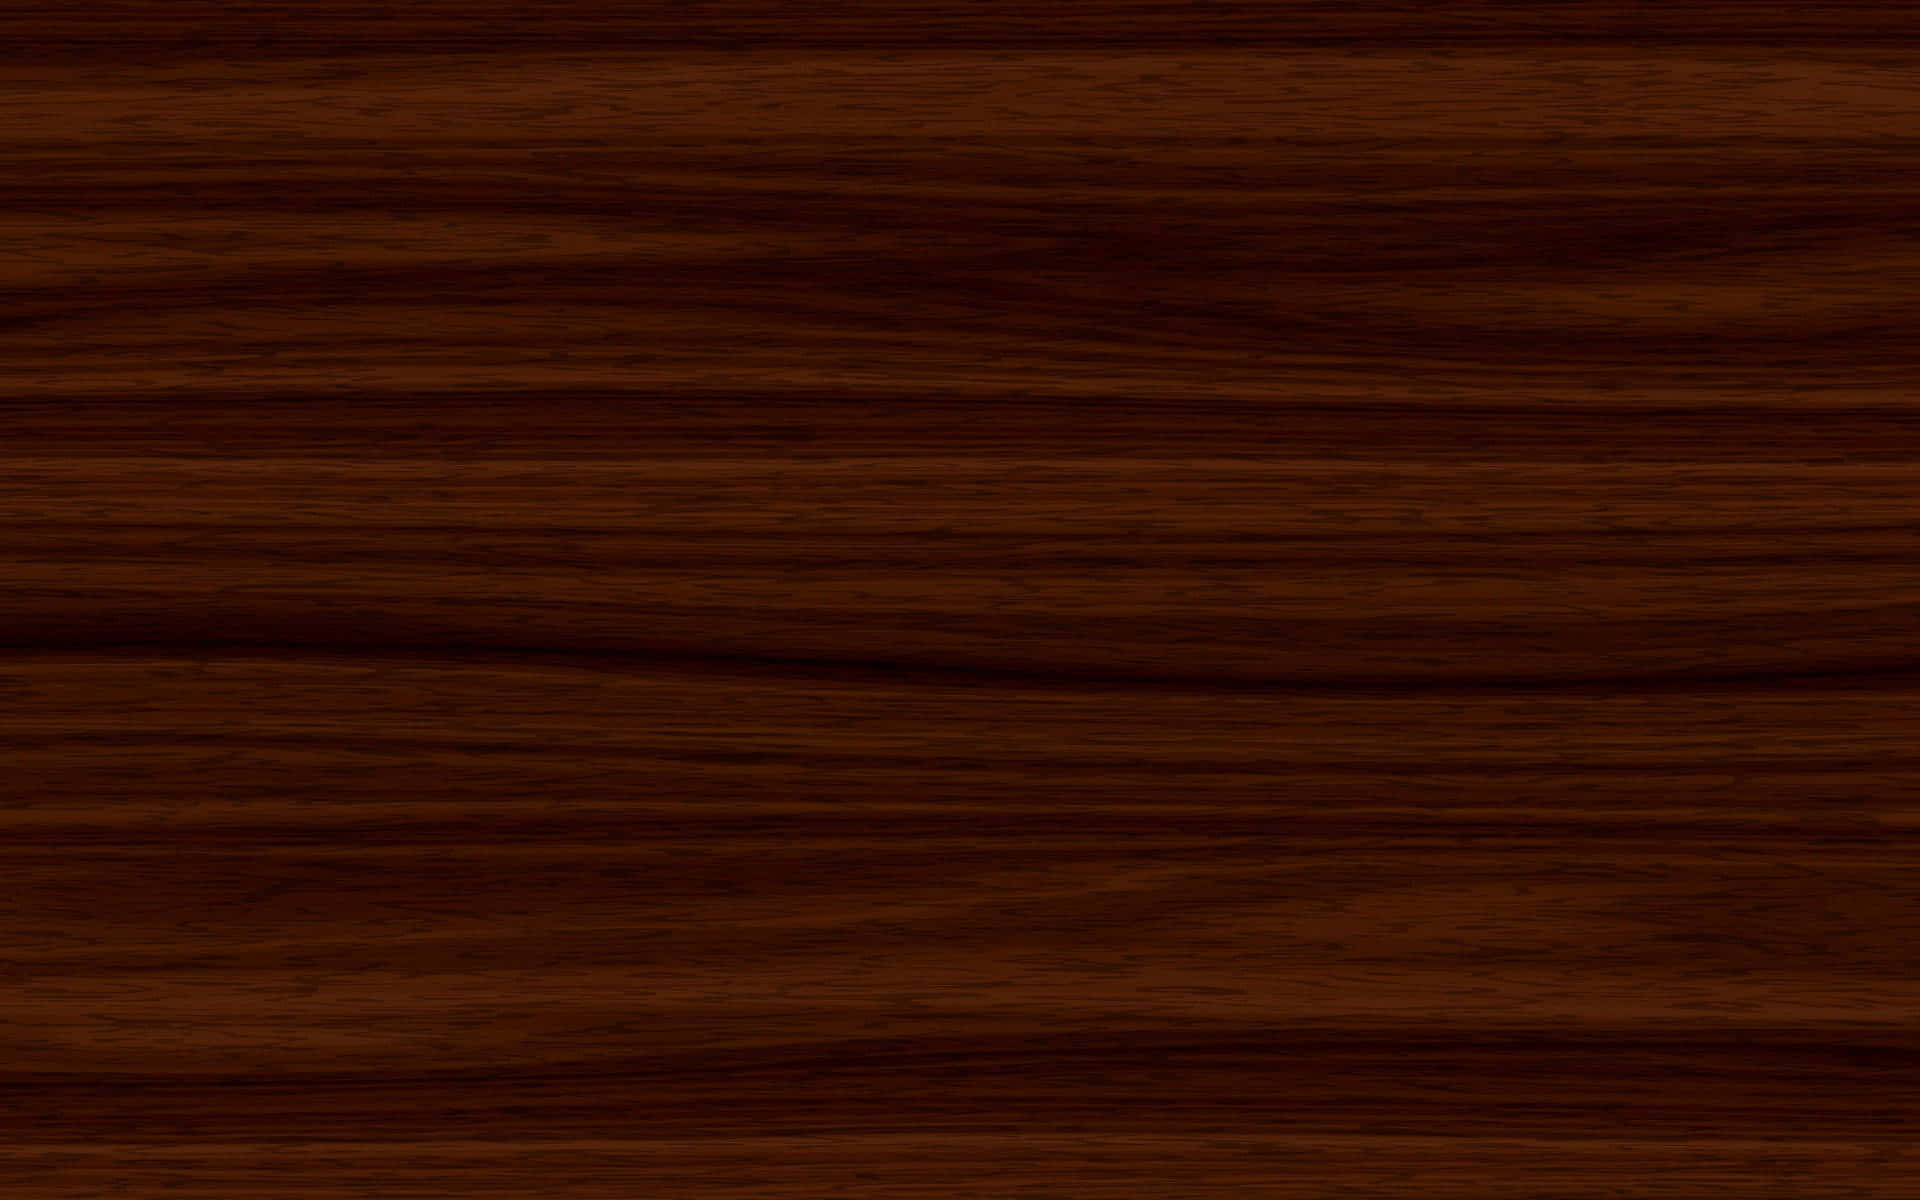 Download Image “High-Resolution Wood Background” 